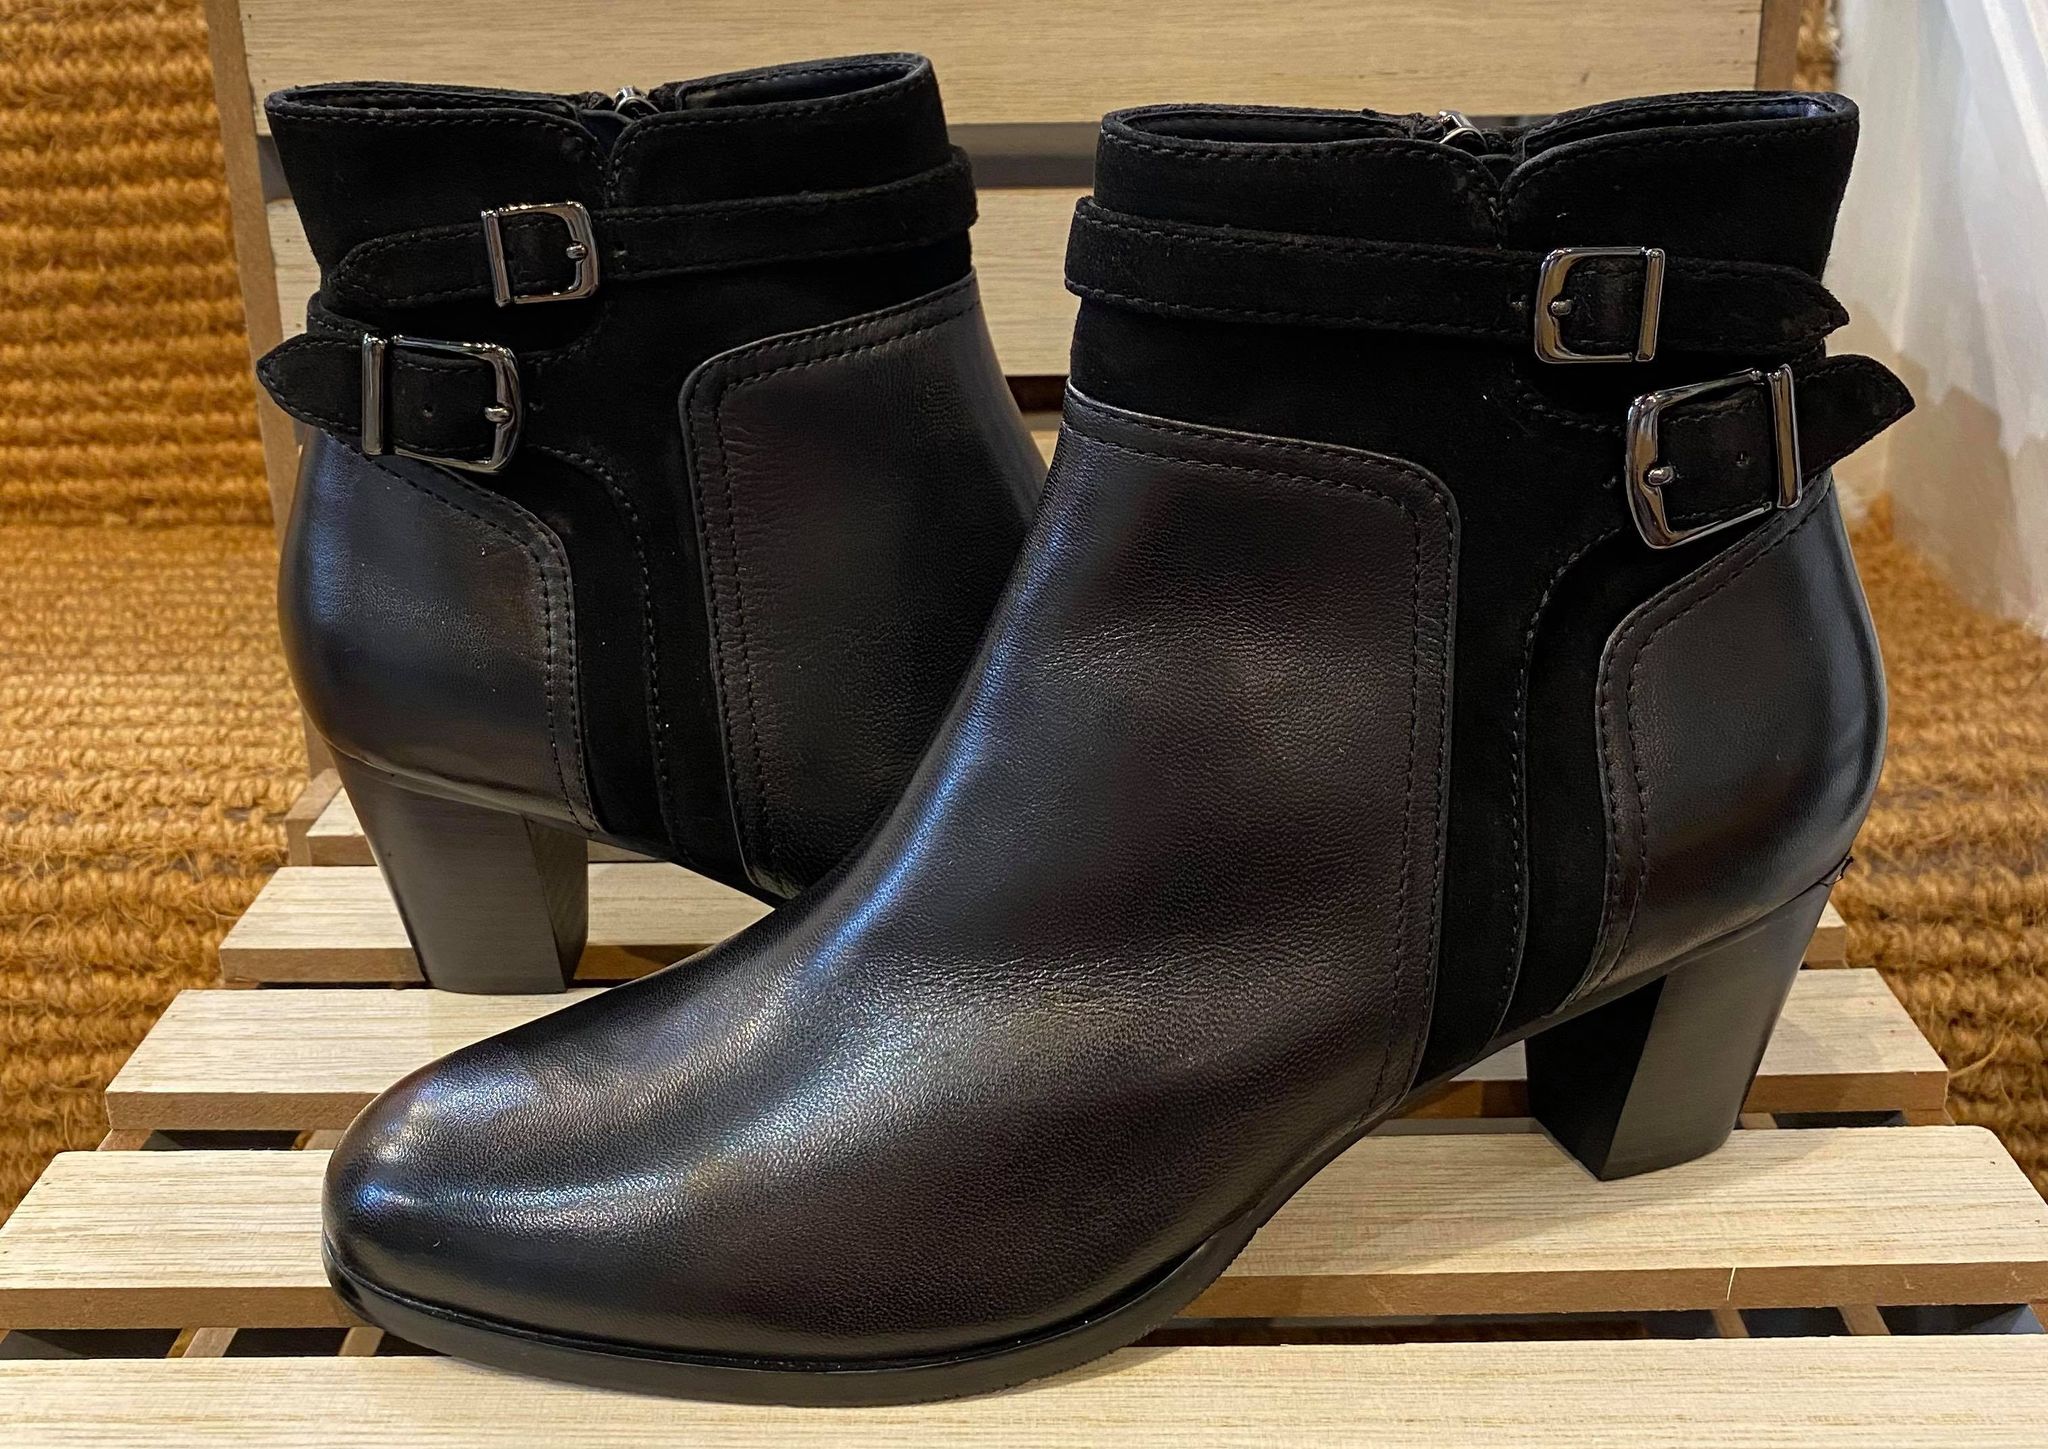 Regarde Le Ciel – Sonia Black Leather Ankle Boots – Elspeth Mills Clothing